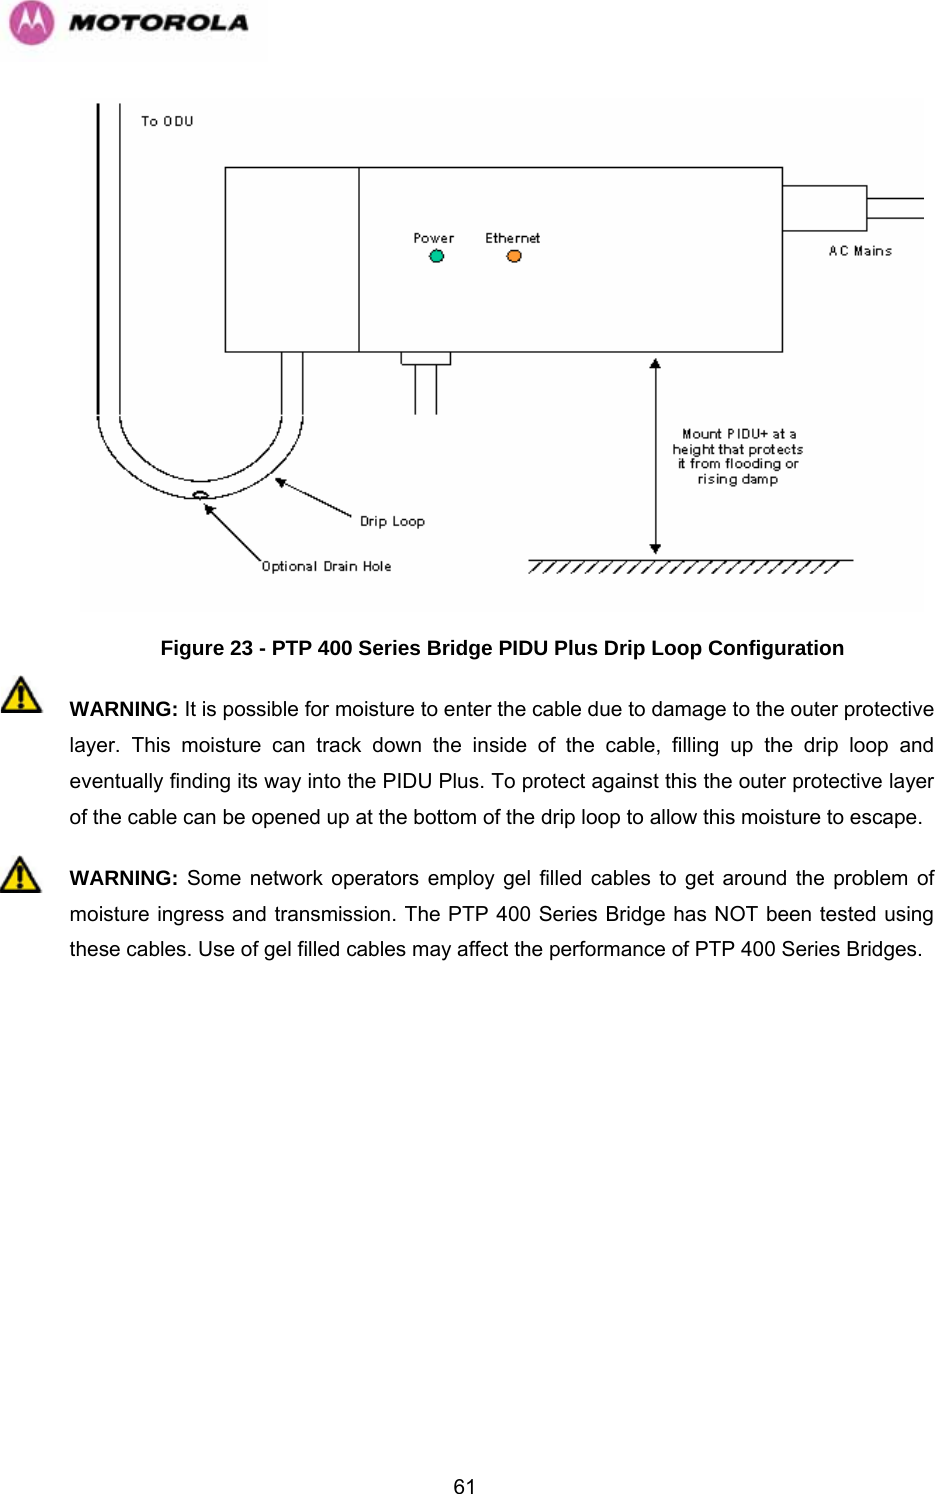   61 Figure 23 - PTP 400 Series Bridge PIDU Plus Drip Loop Configuration WARNING: It is possible for moisture to enter the cable due to damage to the outer protective layer. This moisture can track down the inside of the cable, filling up the drip loop and eventually finding its way into the PIDU Plus. To protect against this the outer protective layer of the cable can be opened up at the bottom of the drip loop to allow this moisture to escape. WARNING: Some network operators employ gel filled cables to get around the problem of moisture ingress and transmission. The PTP 400 Series Bridge has NOT been tested using these cables. Use of gel filled cables may affect the performance of PTP 400 Series Bridges.  